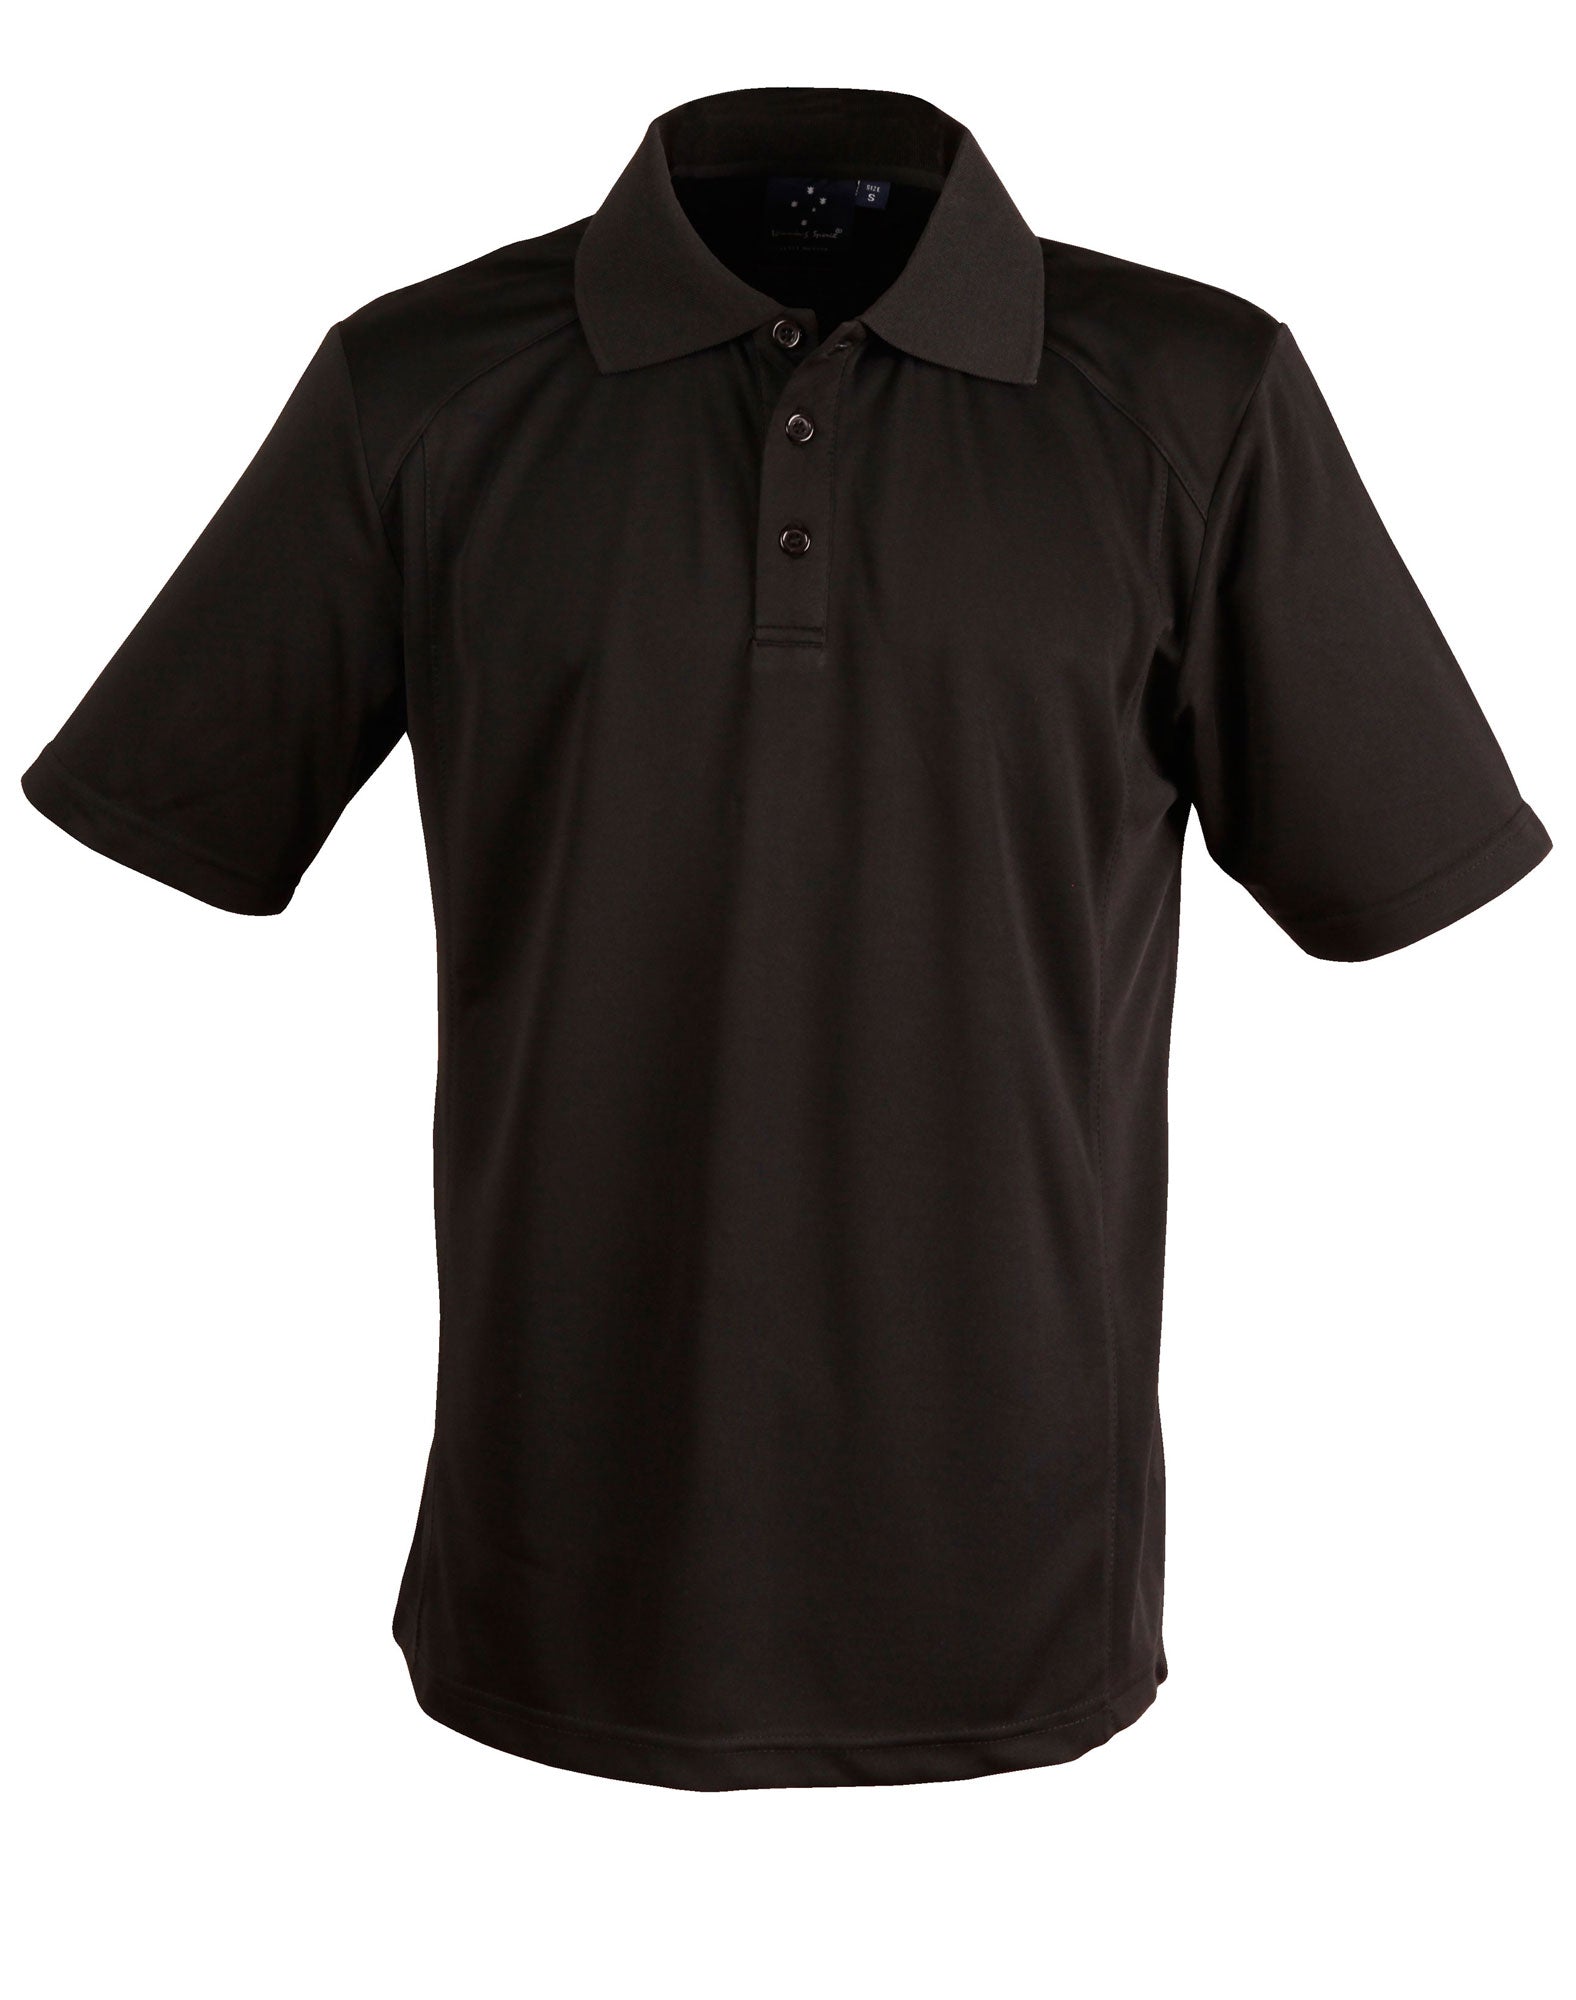 [PS59] Men's Bamboo Charcoal S/S Polo